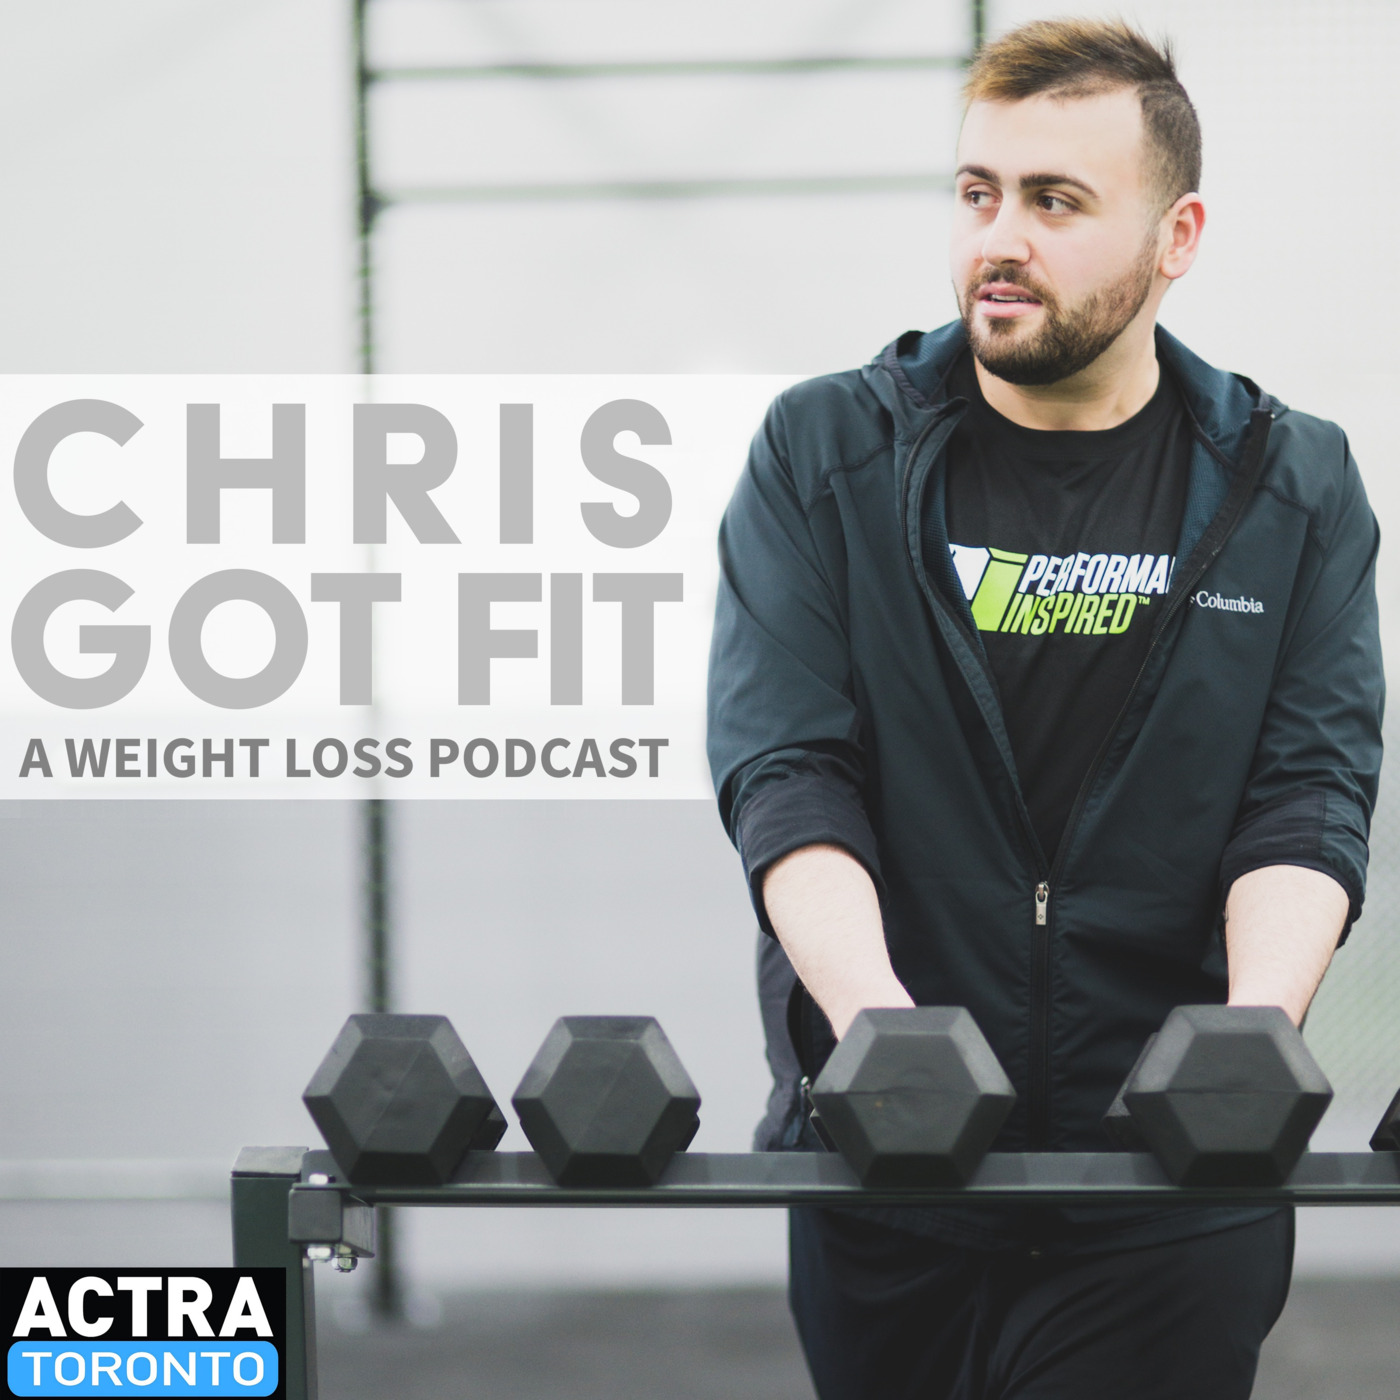 Chris Got Fit: A Weight Loss Podcast